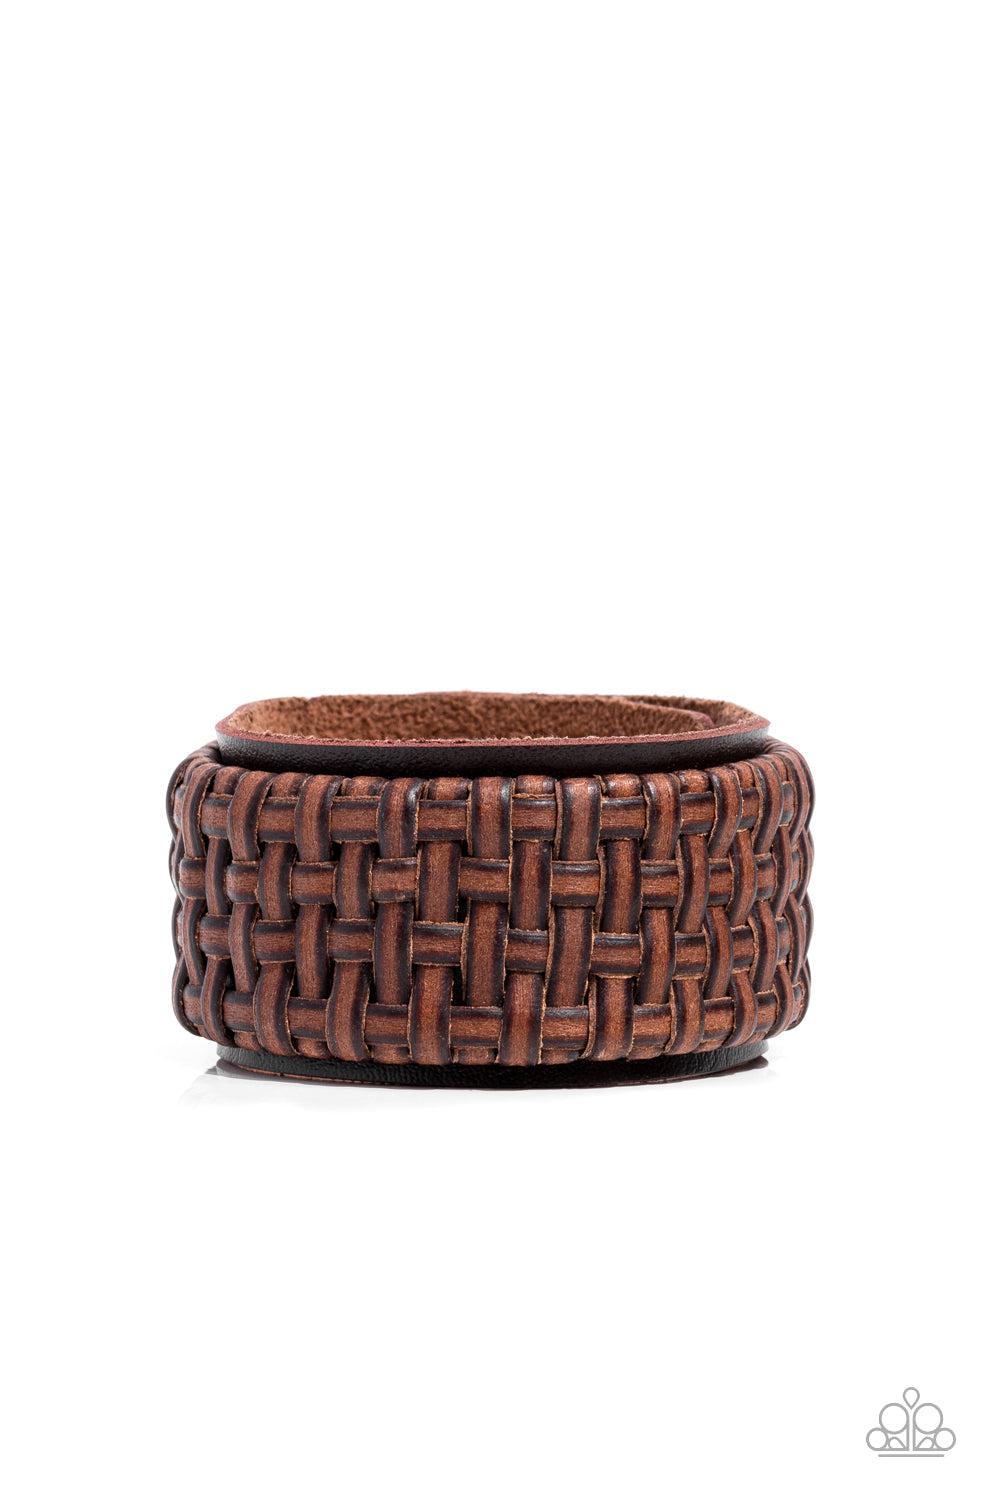 Urban Expansion Brown Leather Snap Bracelet - Paparazzi Accessories- lightbox - CarasShop.com - $5 Jewelry by Cara Jewels